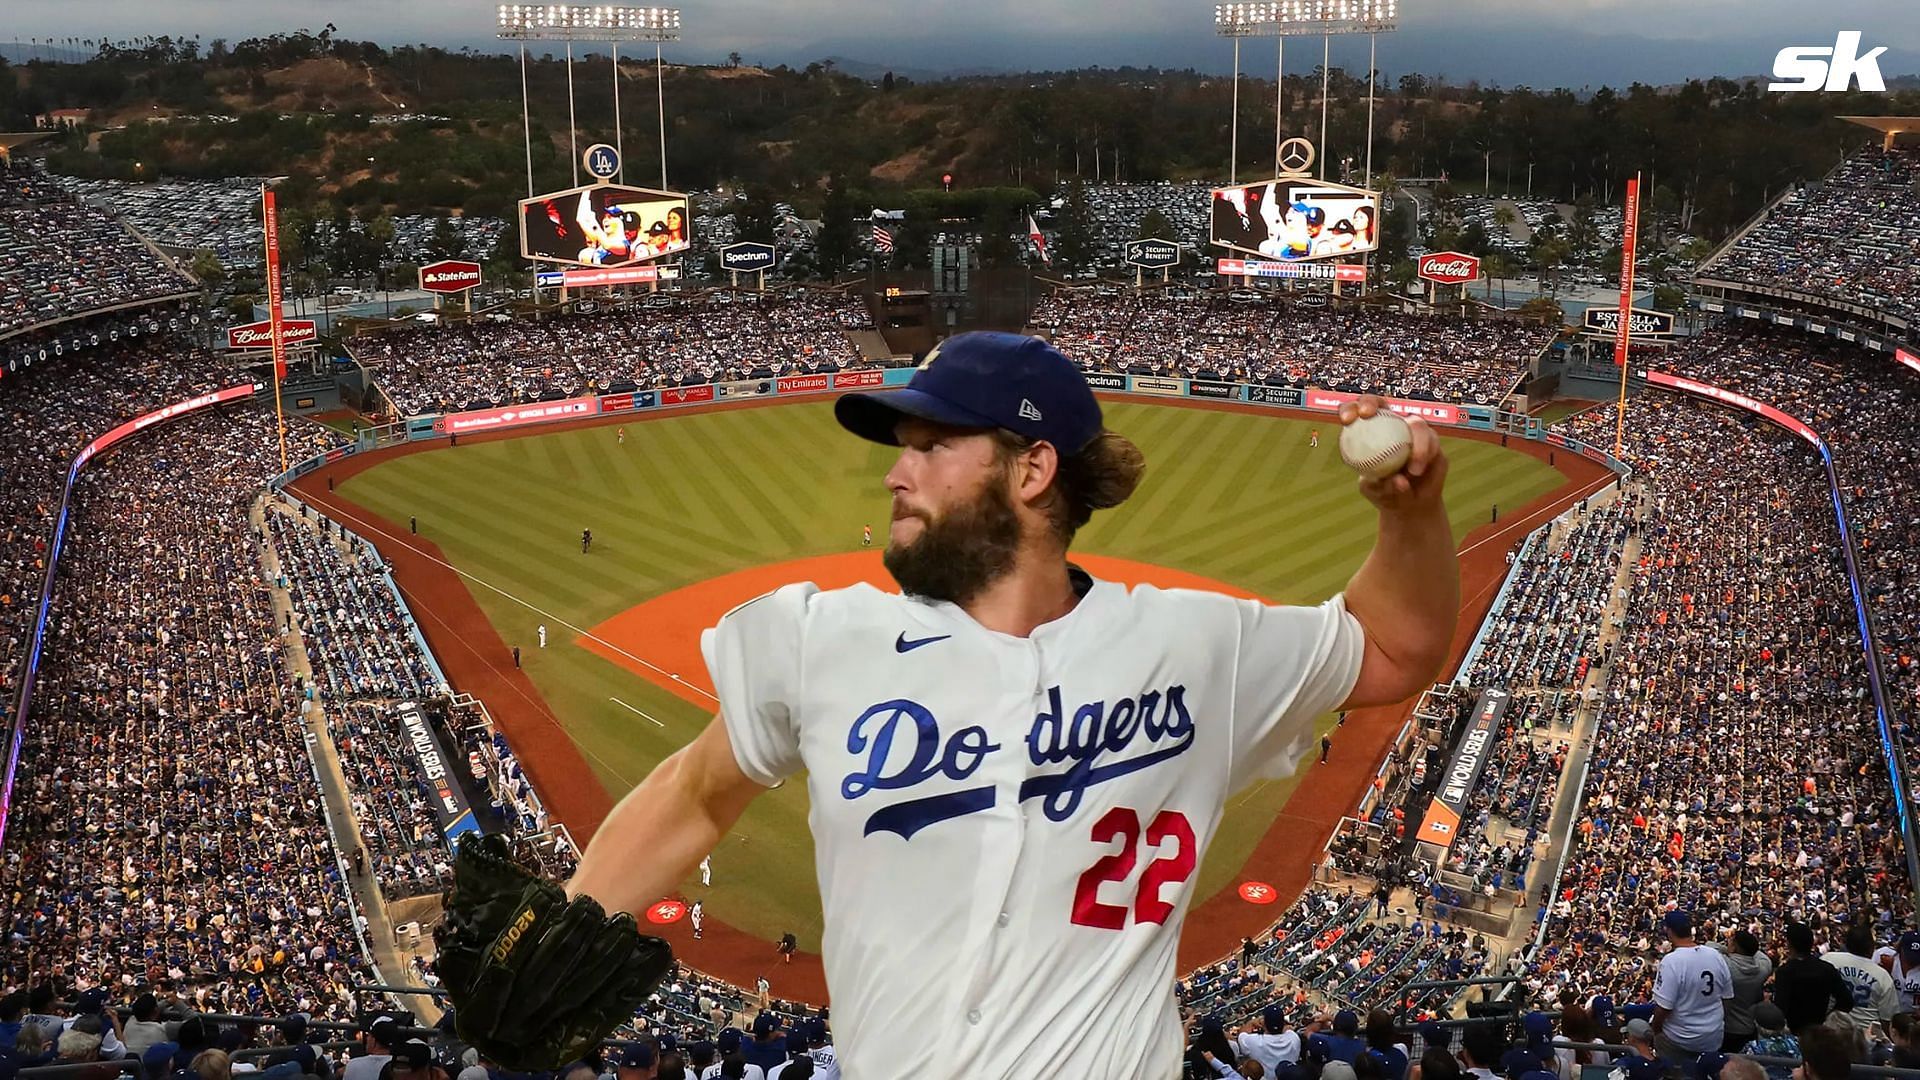 Clayton Kershaw hints towards a possible exit from the Dodgers at the end of the season